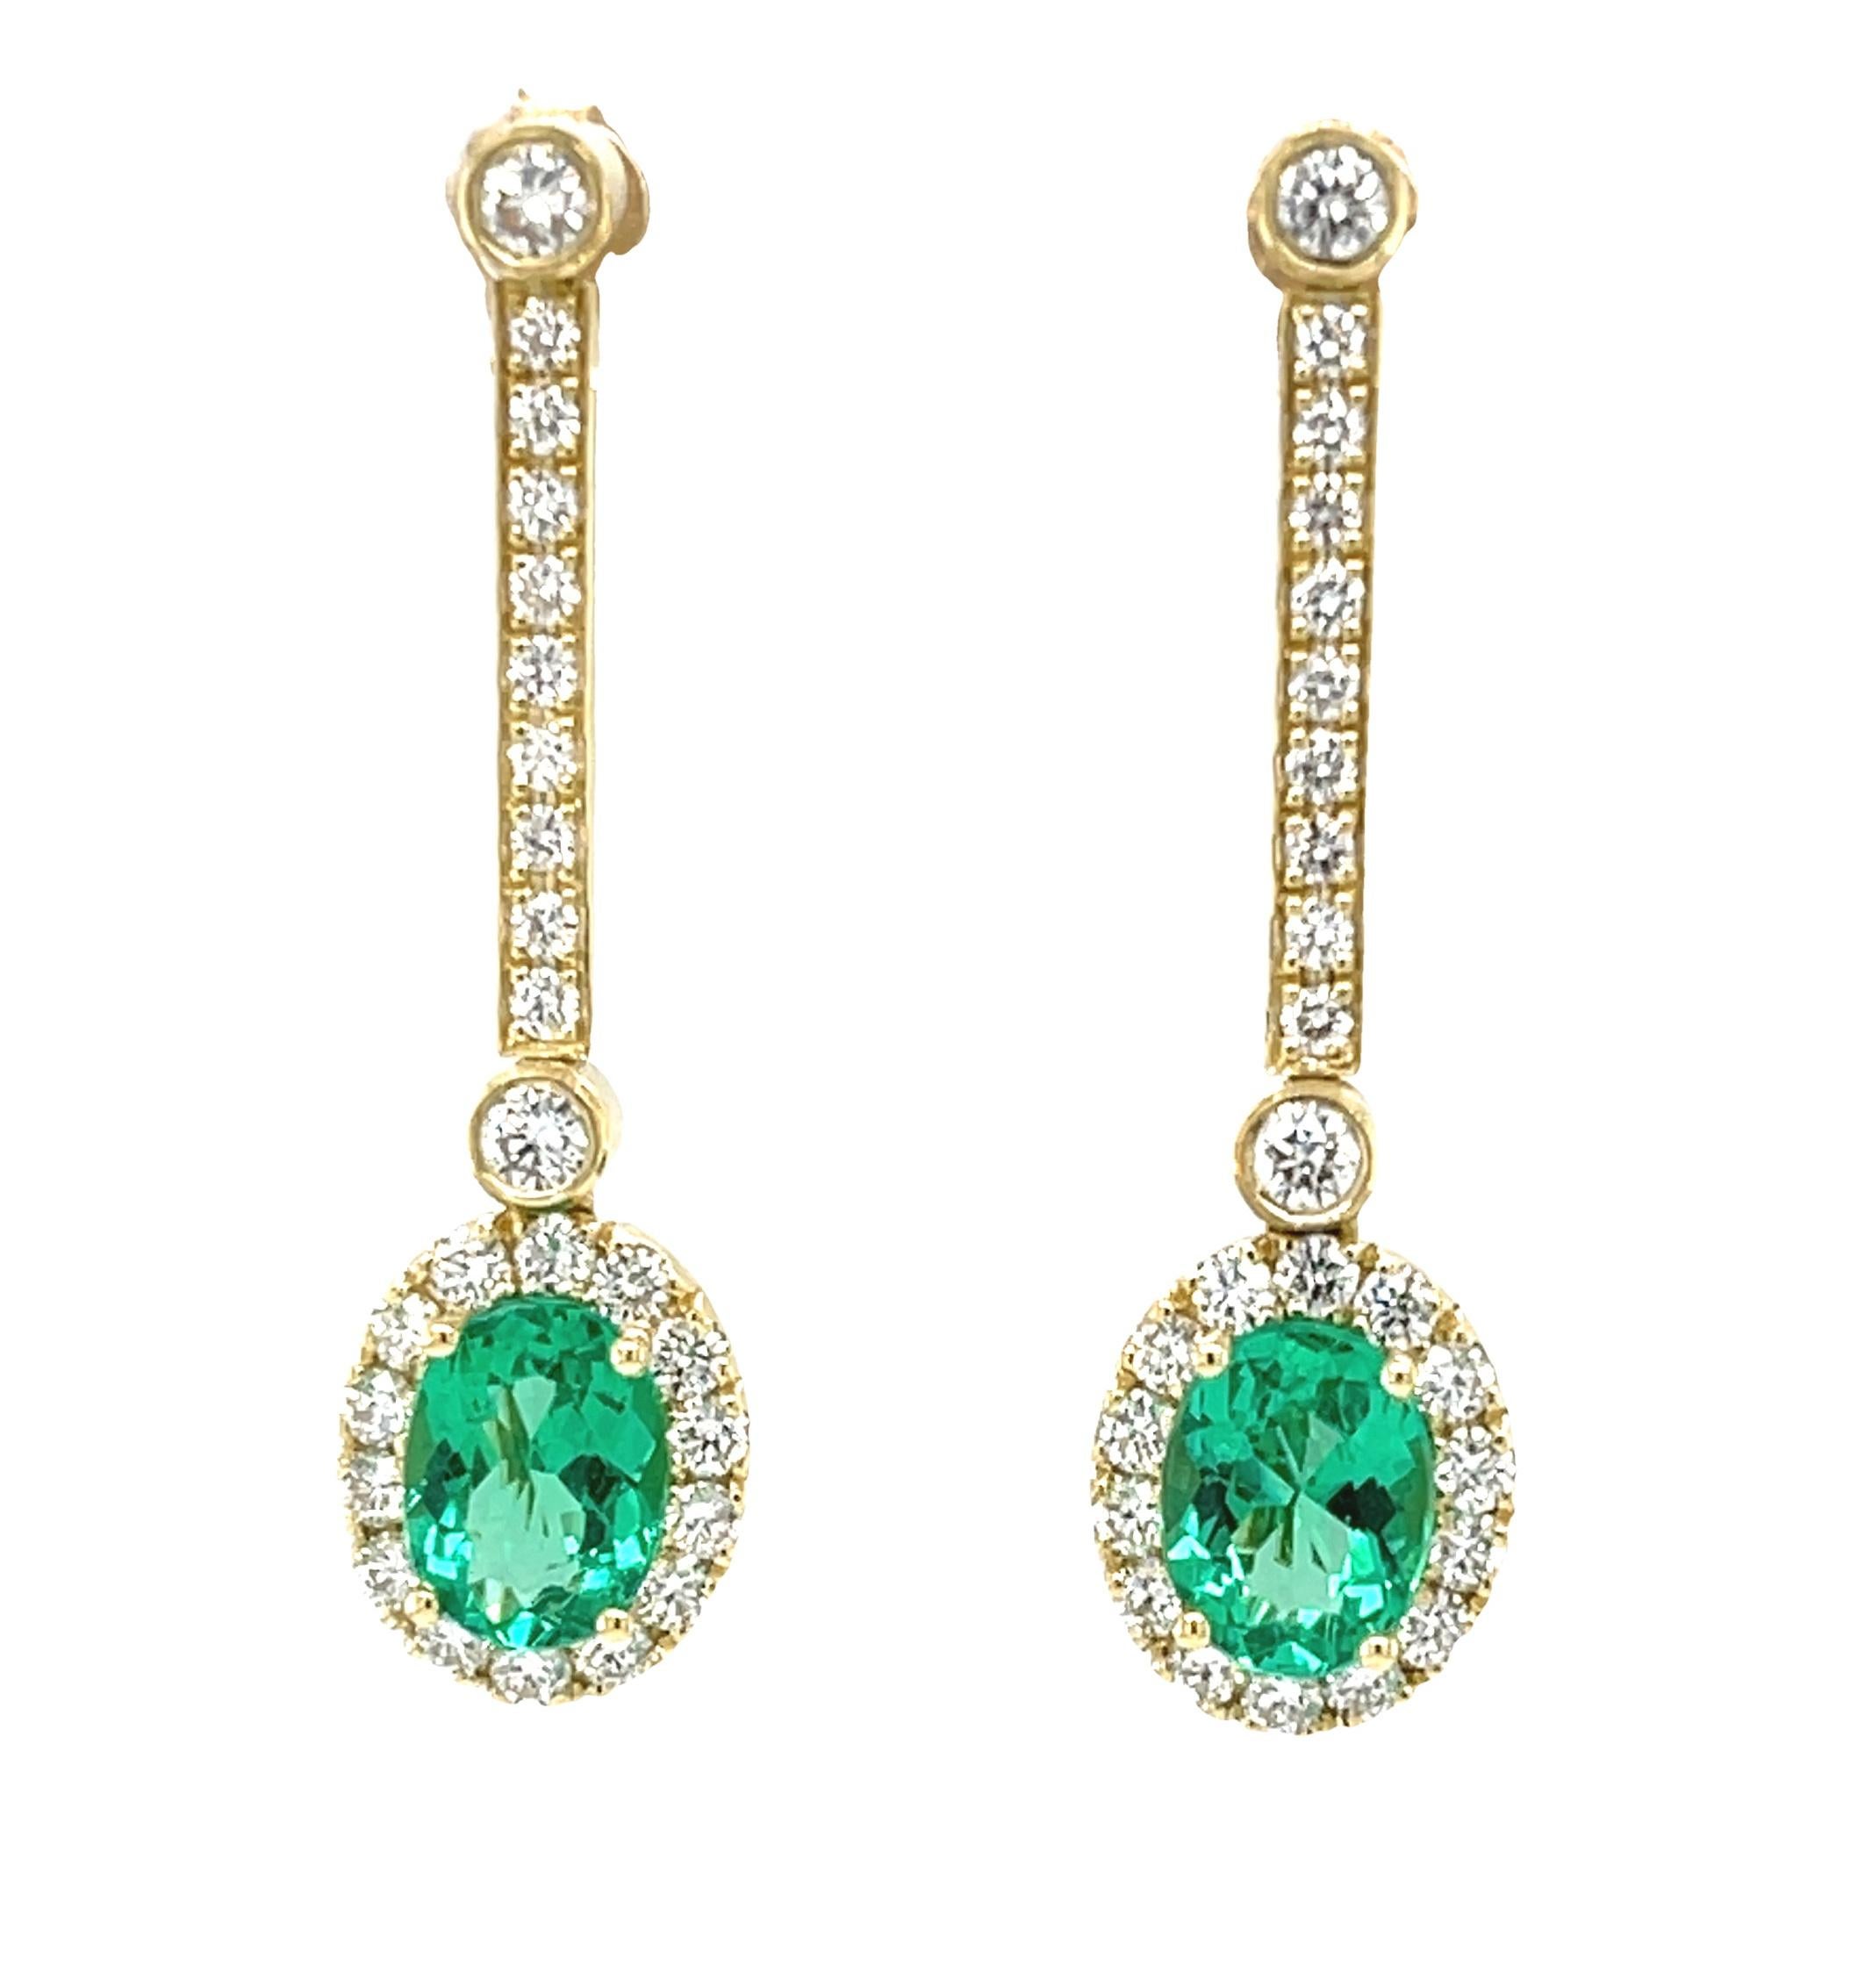 These sophisticated and beautifully versatile earrings feature emerald and diamond drops suspended from an elegant line of sparkling diamonds! The perfectly matched oval emeralds are fine quality with exceptional clarity and gorgeous, bright green